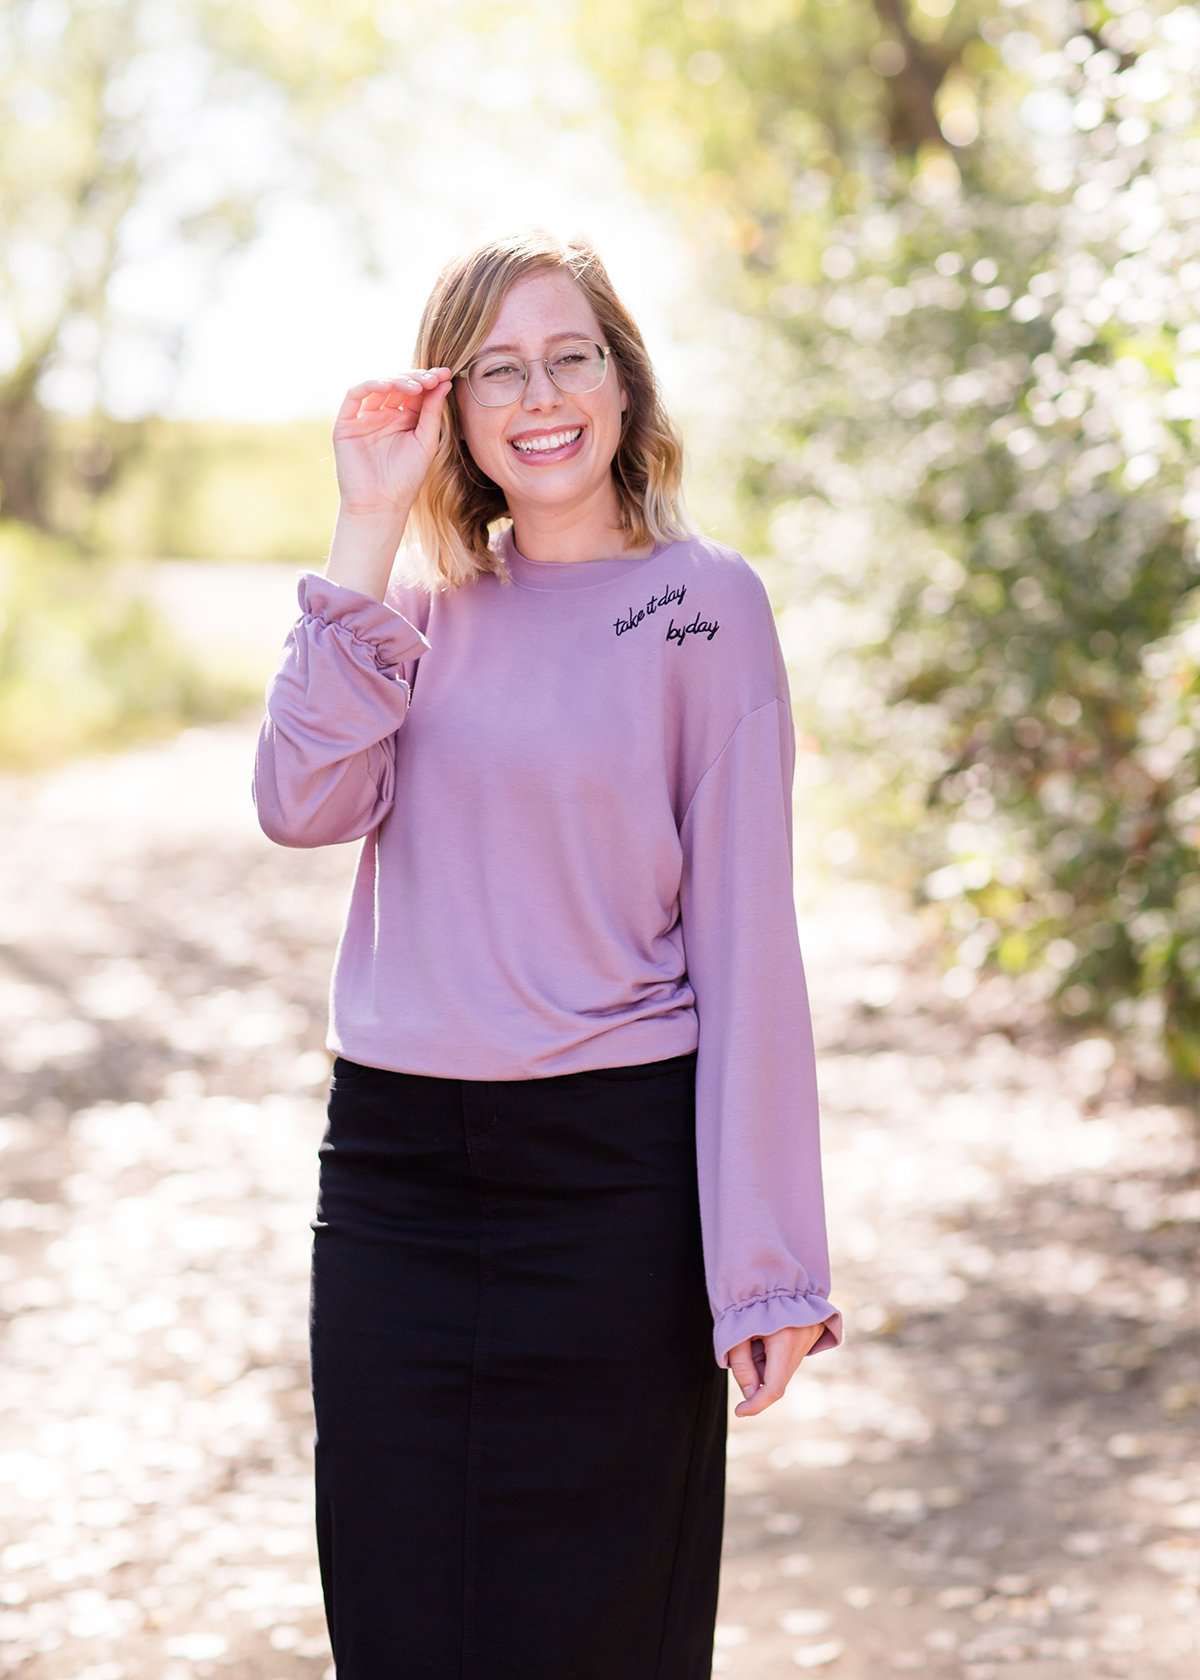 Lavender sweatshirt with ruffle at the end of the sleeves and embroidered up on the left shoulder with "Take it day by day."